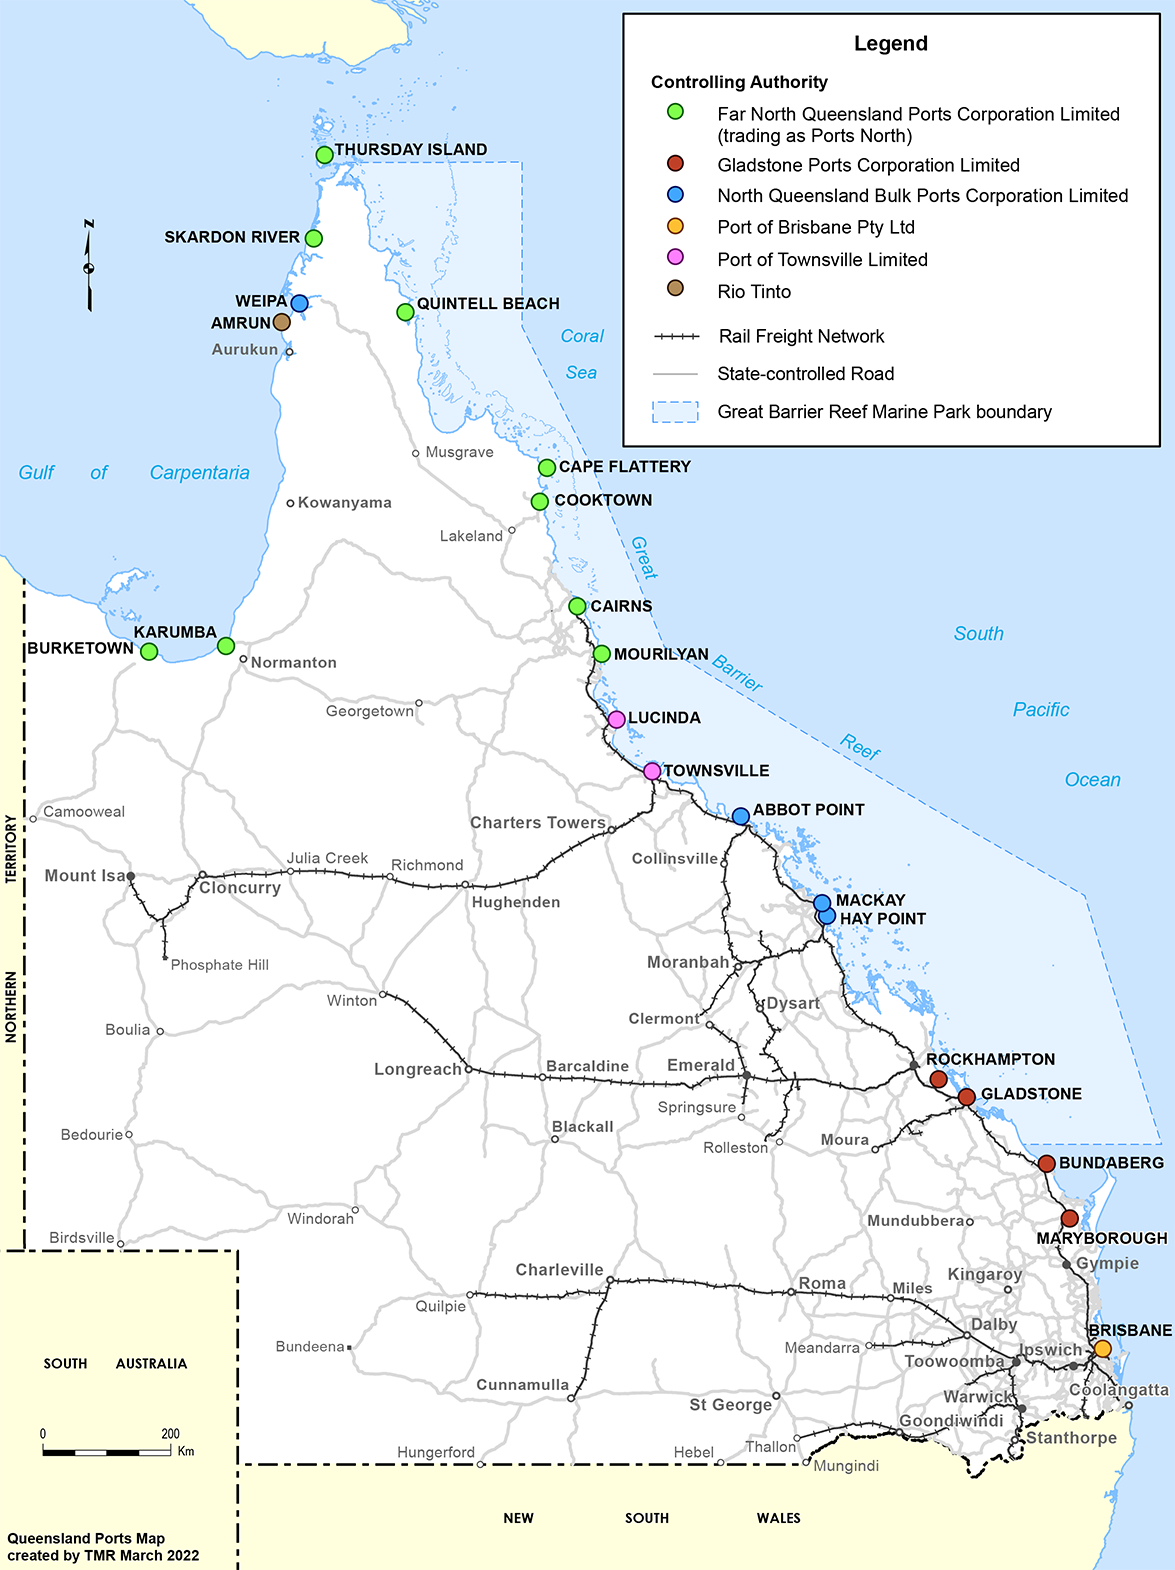 Map showing Queensland ports and their controlling authorities